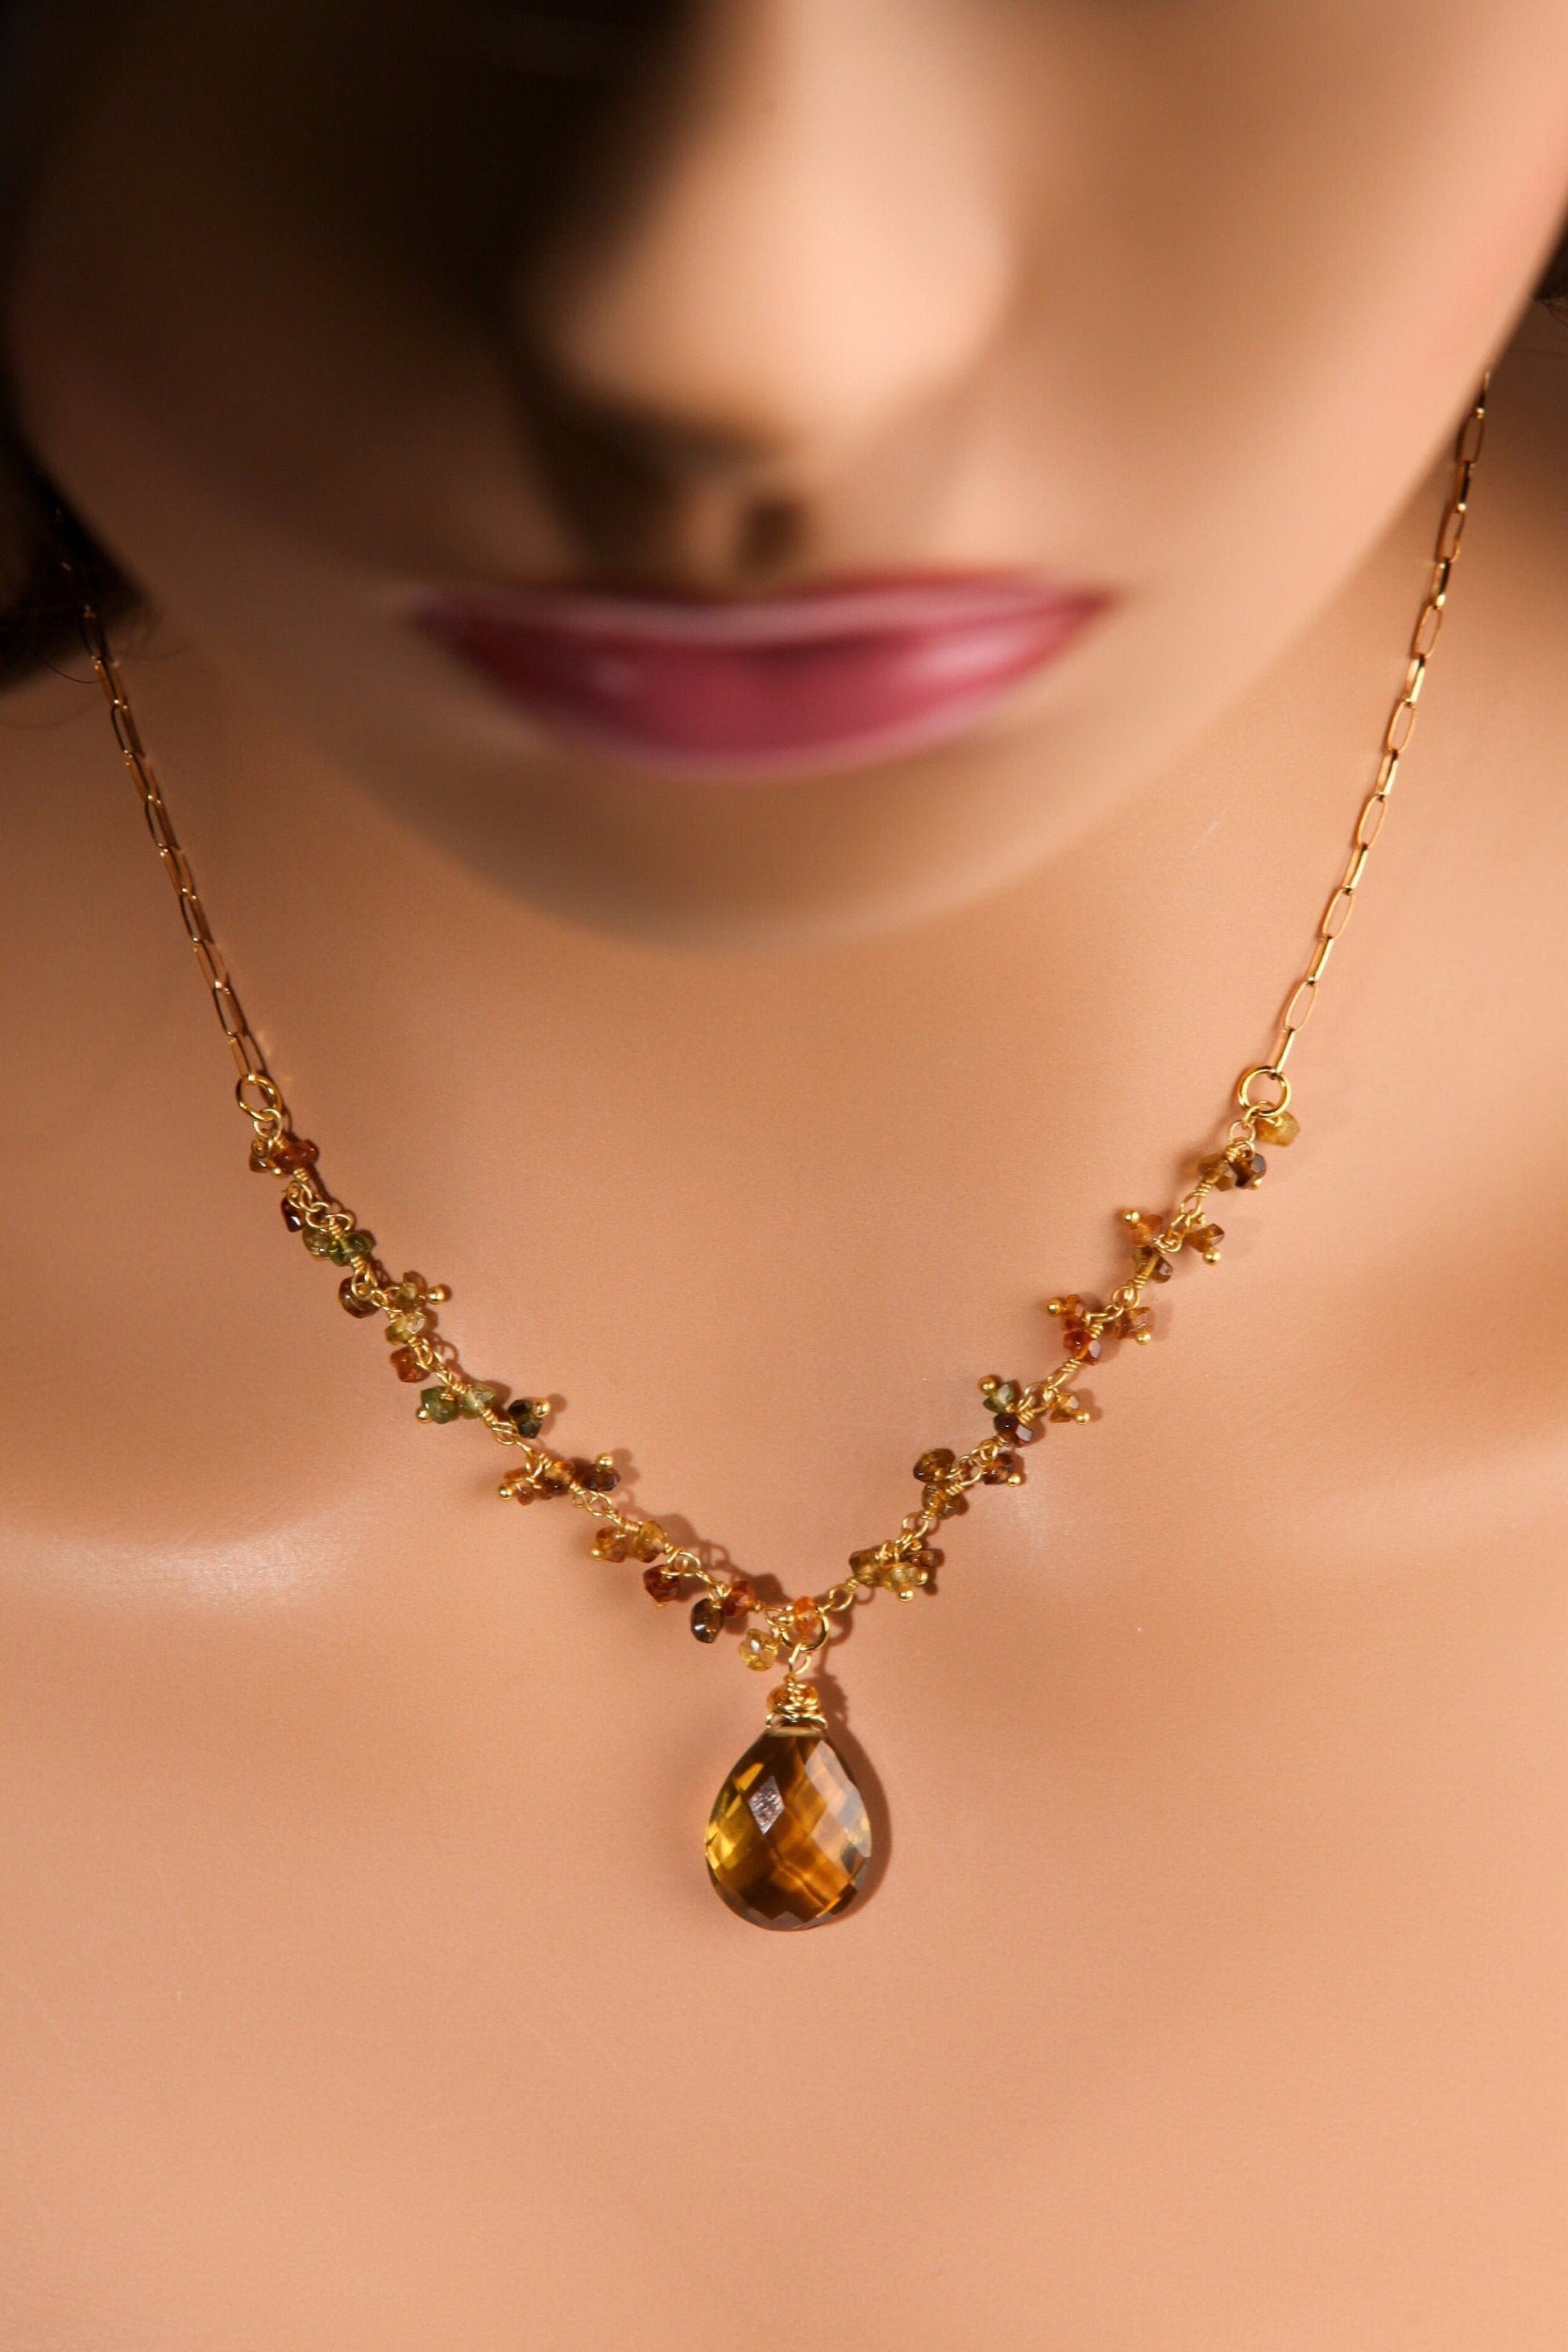 Honey Citrine Teardrop Pendant, Petro Brown Tourmaline Wire Wrapped Necklace, Matching Earrings Jewelry Set in 14k Gold Filled Handmade Gift